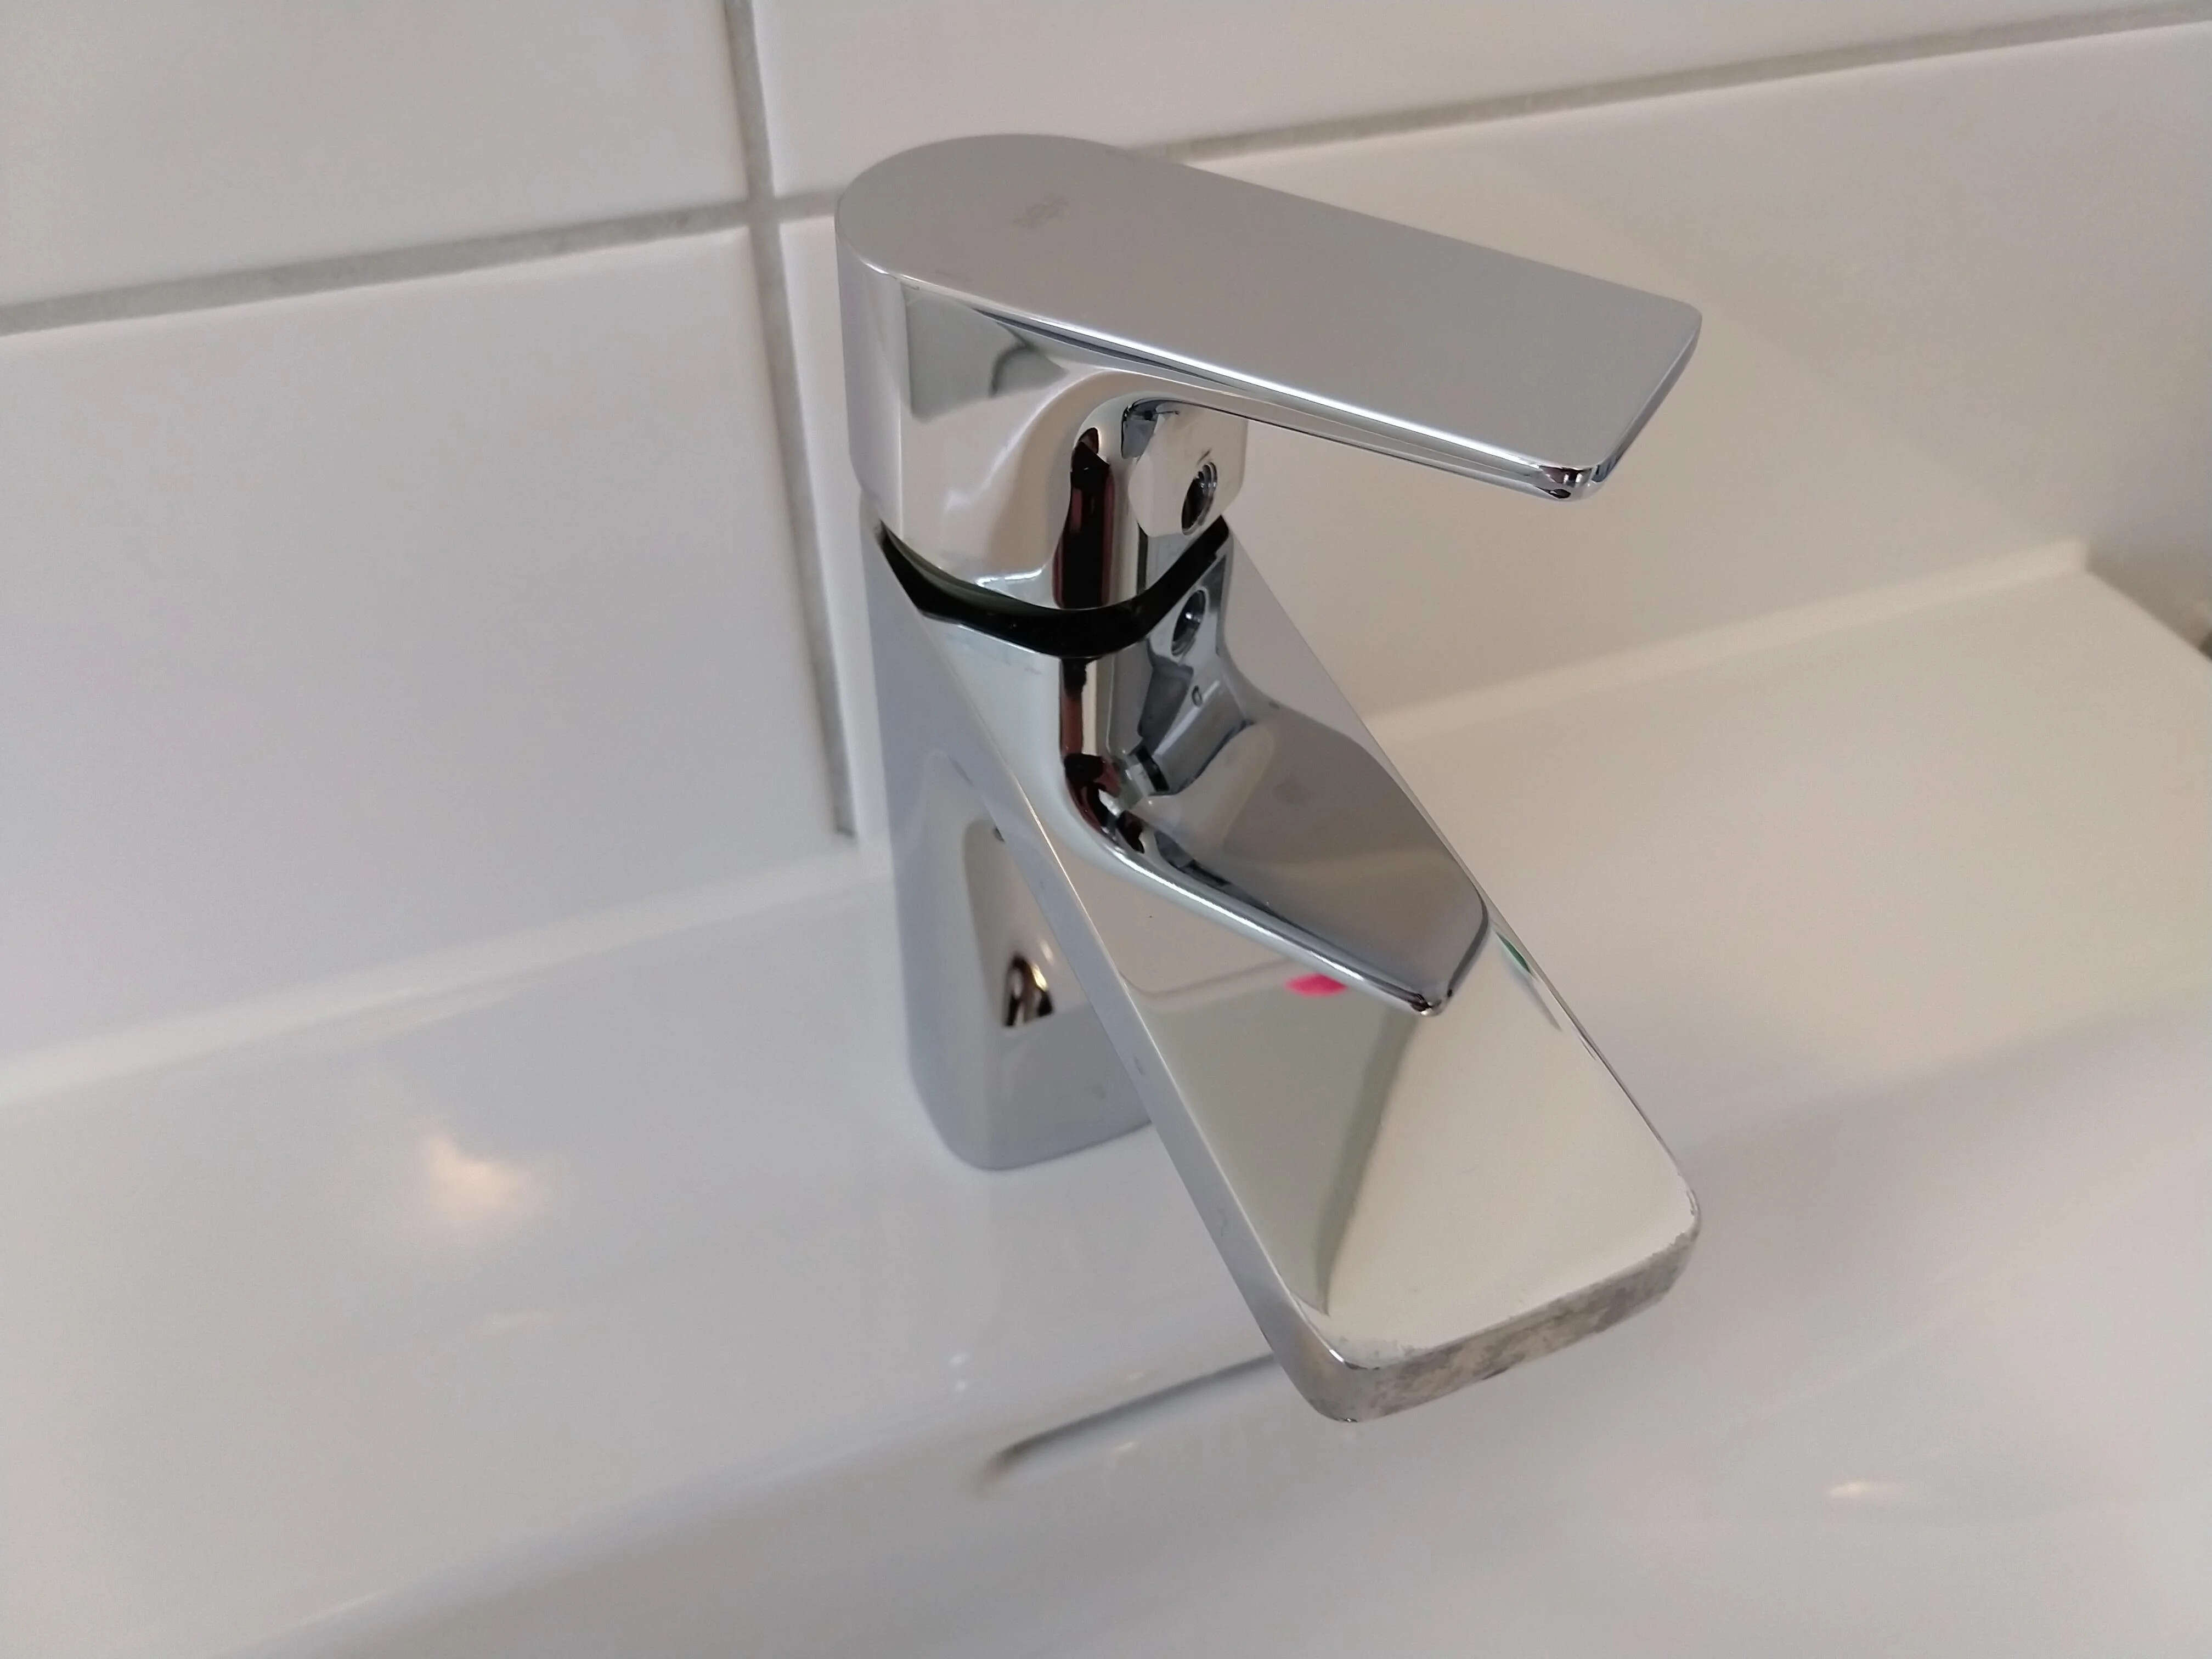 How To Fix Squeaky Faucet Handle